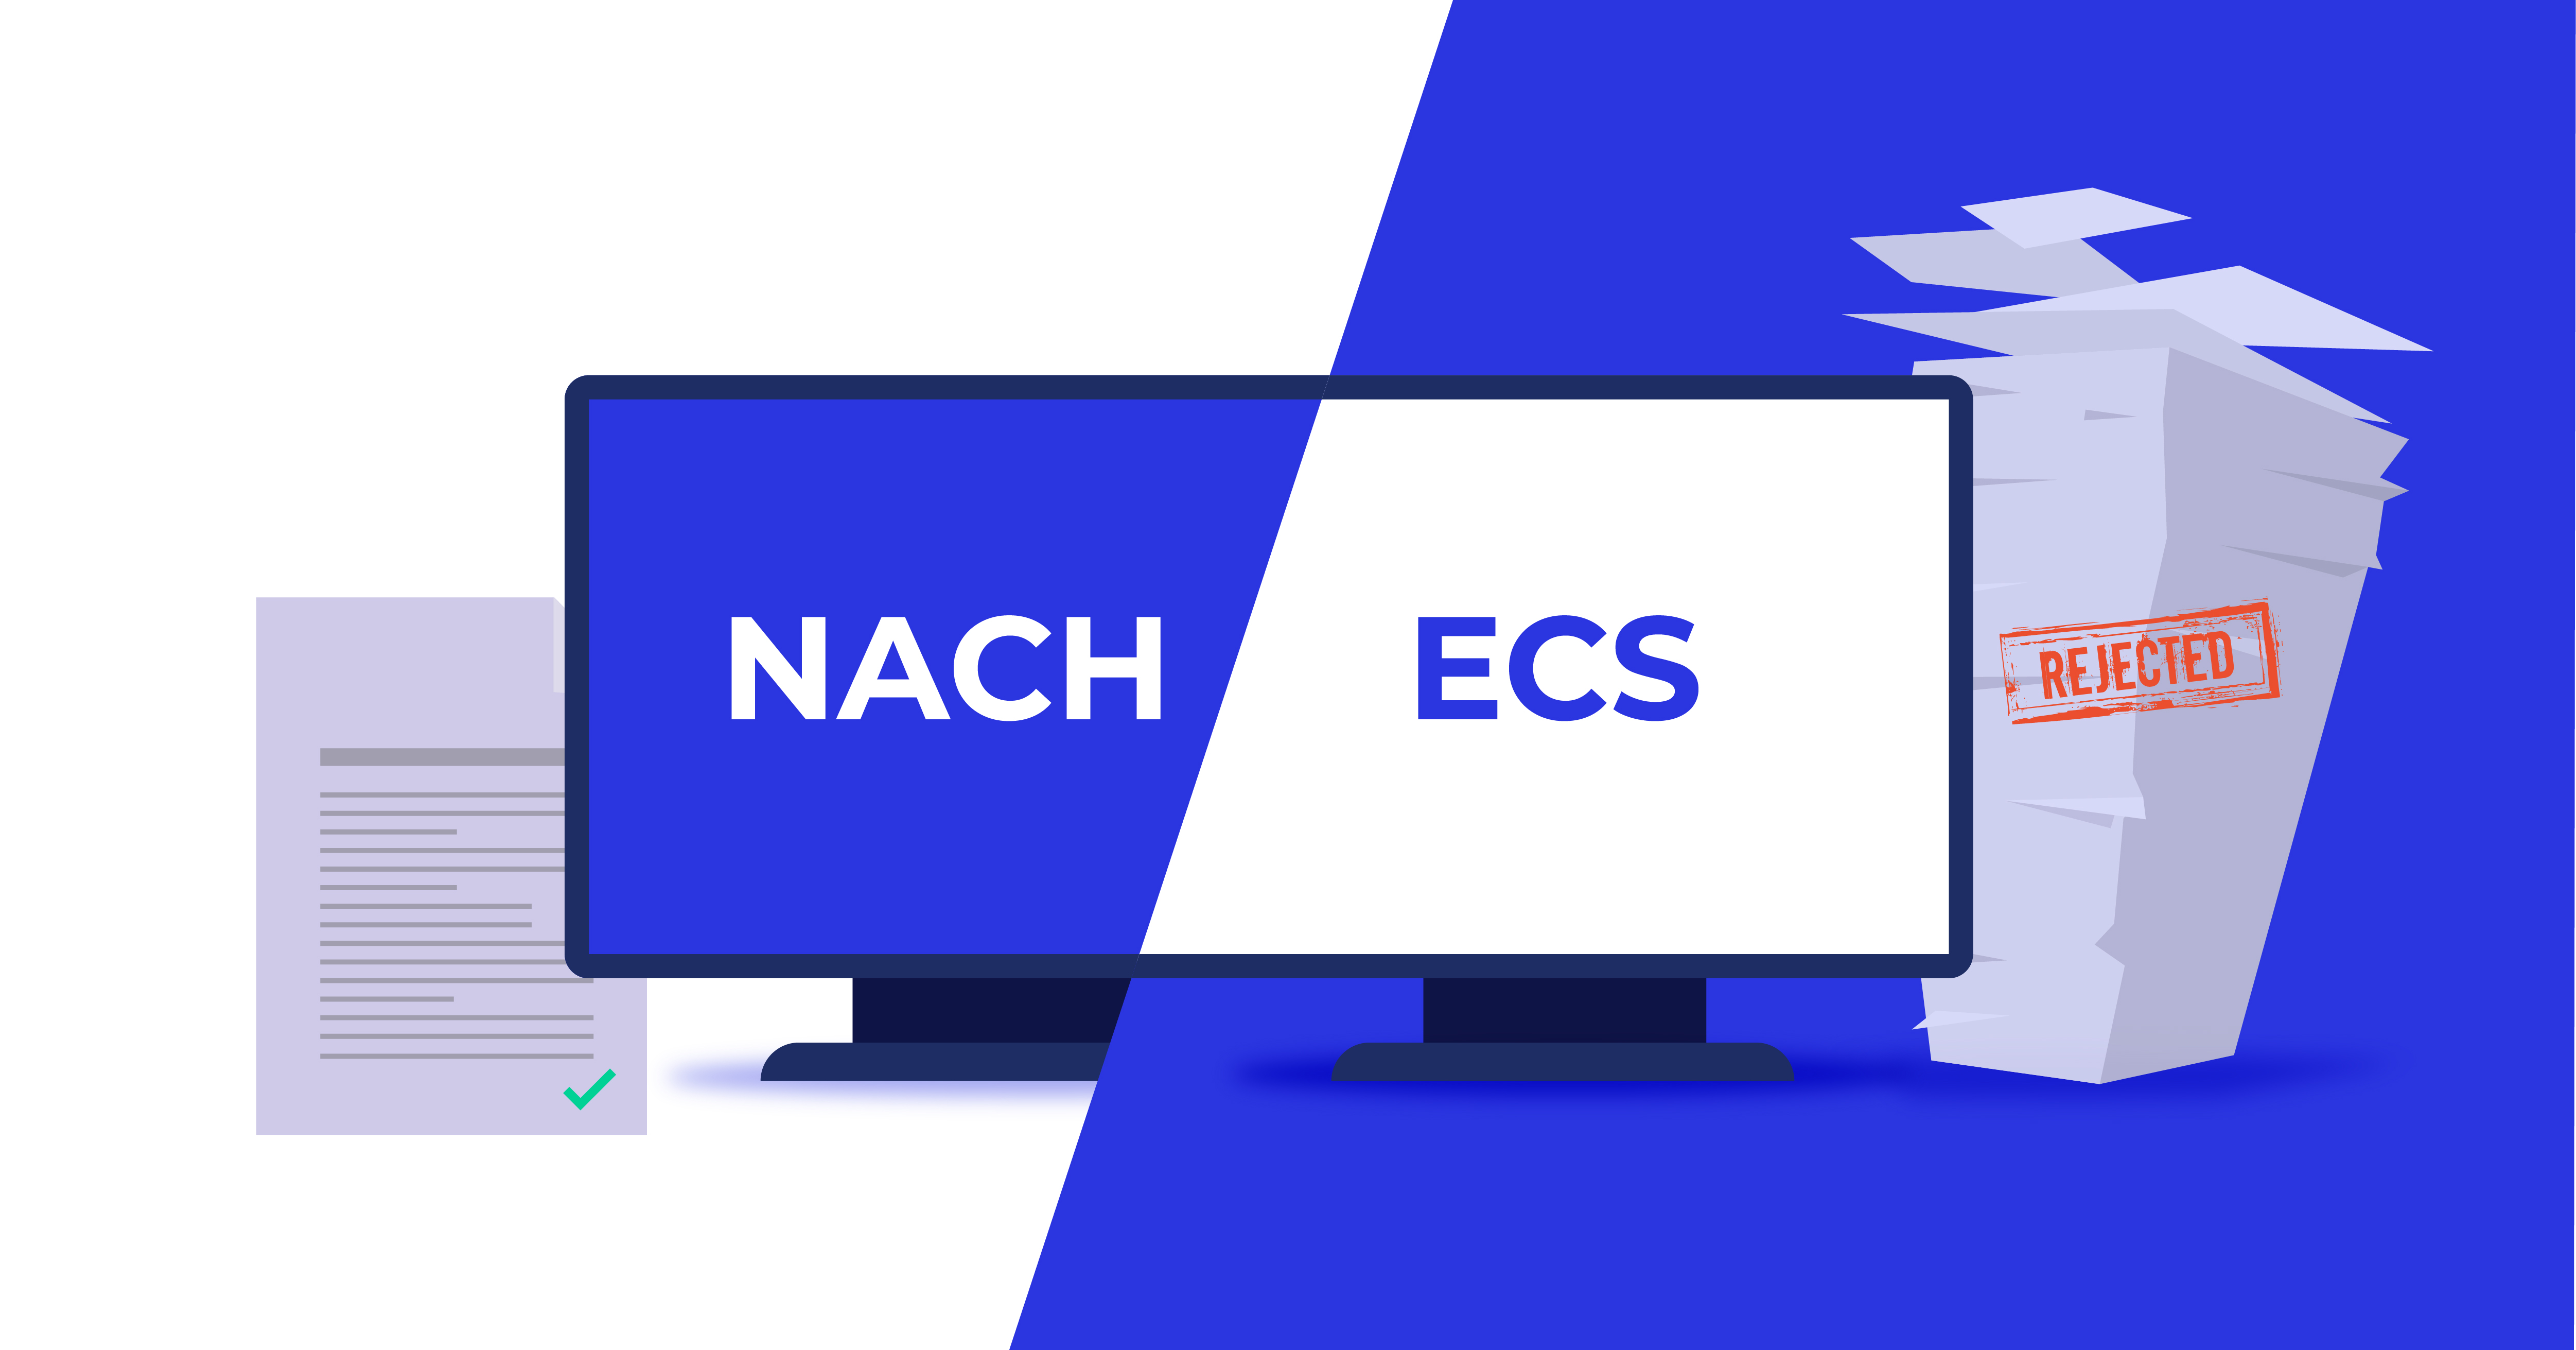 Difference-between-NACH-and-ECS